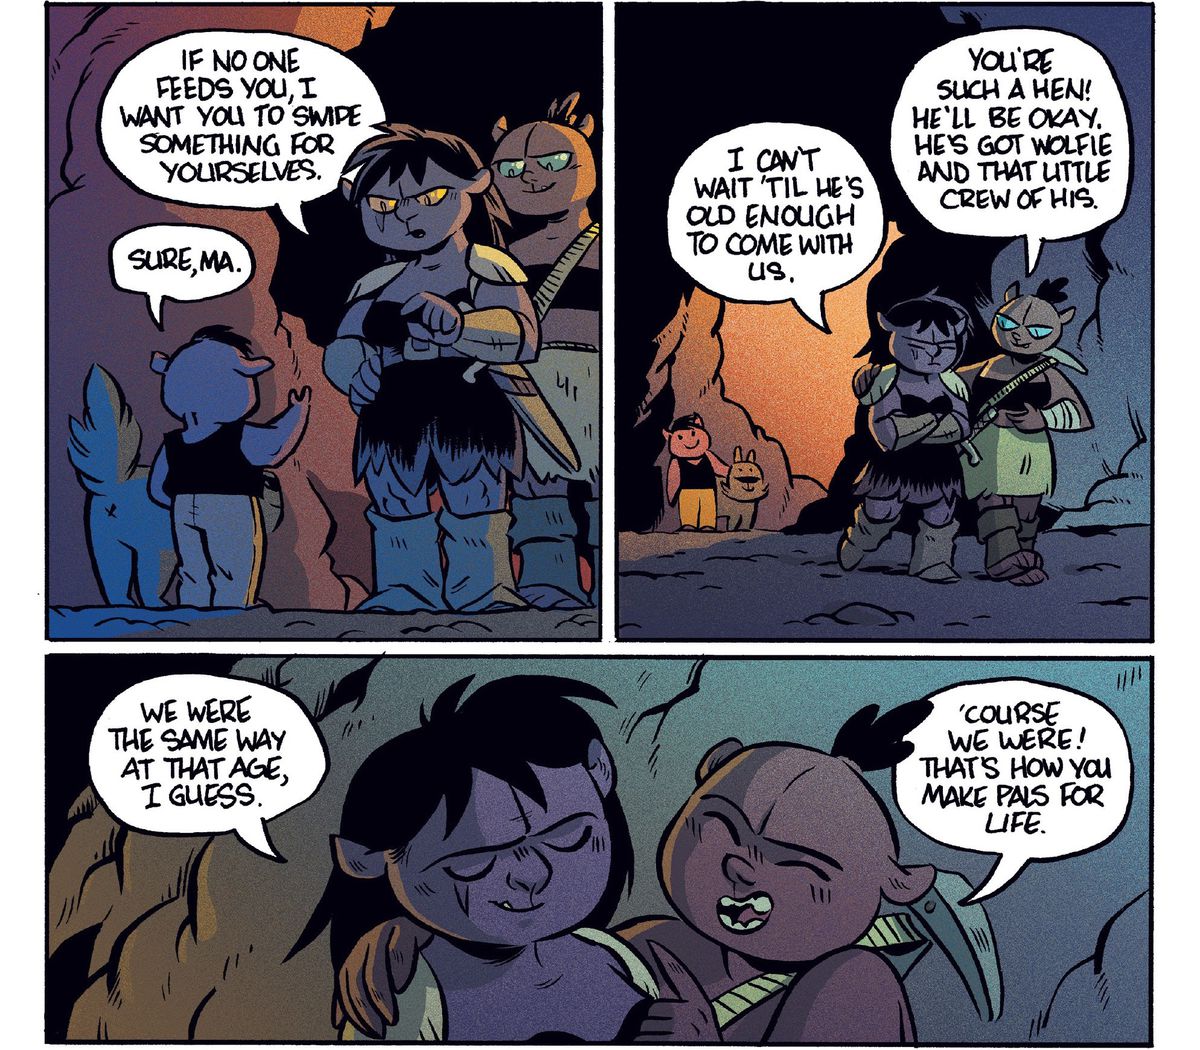 “If no one feeds you, I want you to swipe something for yourselves,” an orc warrior mom tells her son and his dog. “You’re such a hen!” her friend reassures her, “He’ll be okay. He’s got wolfie and that little crew of his,” in Orcs! #1, Boom Studios (2021). 